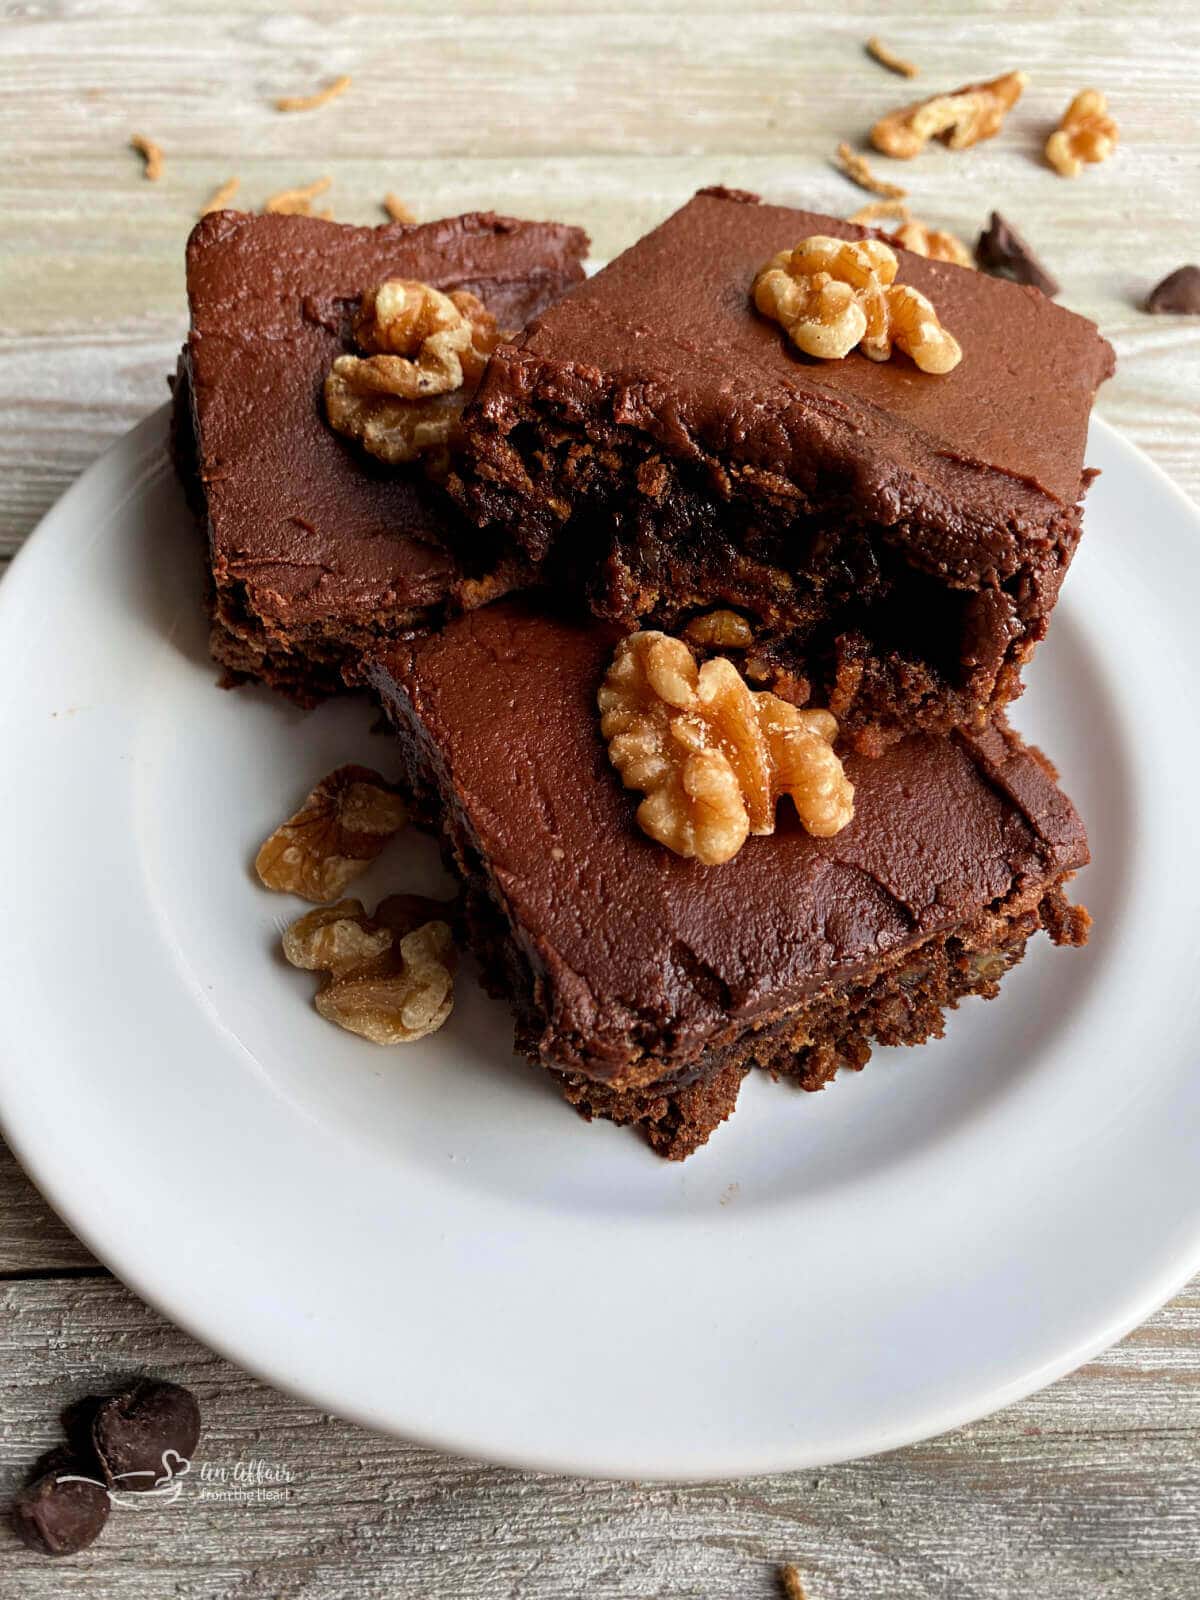 Chocolate Bar Cookies topped with walnuts.